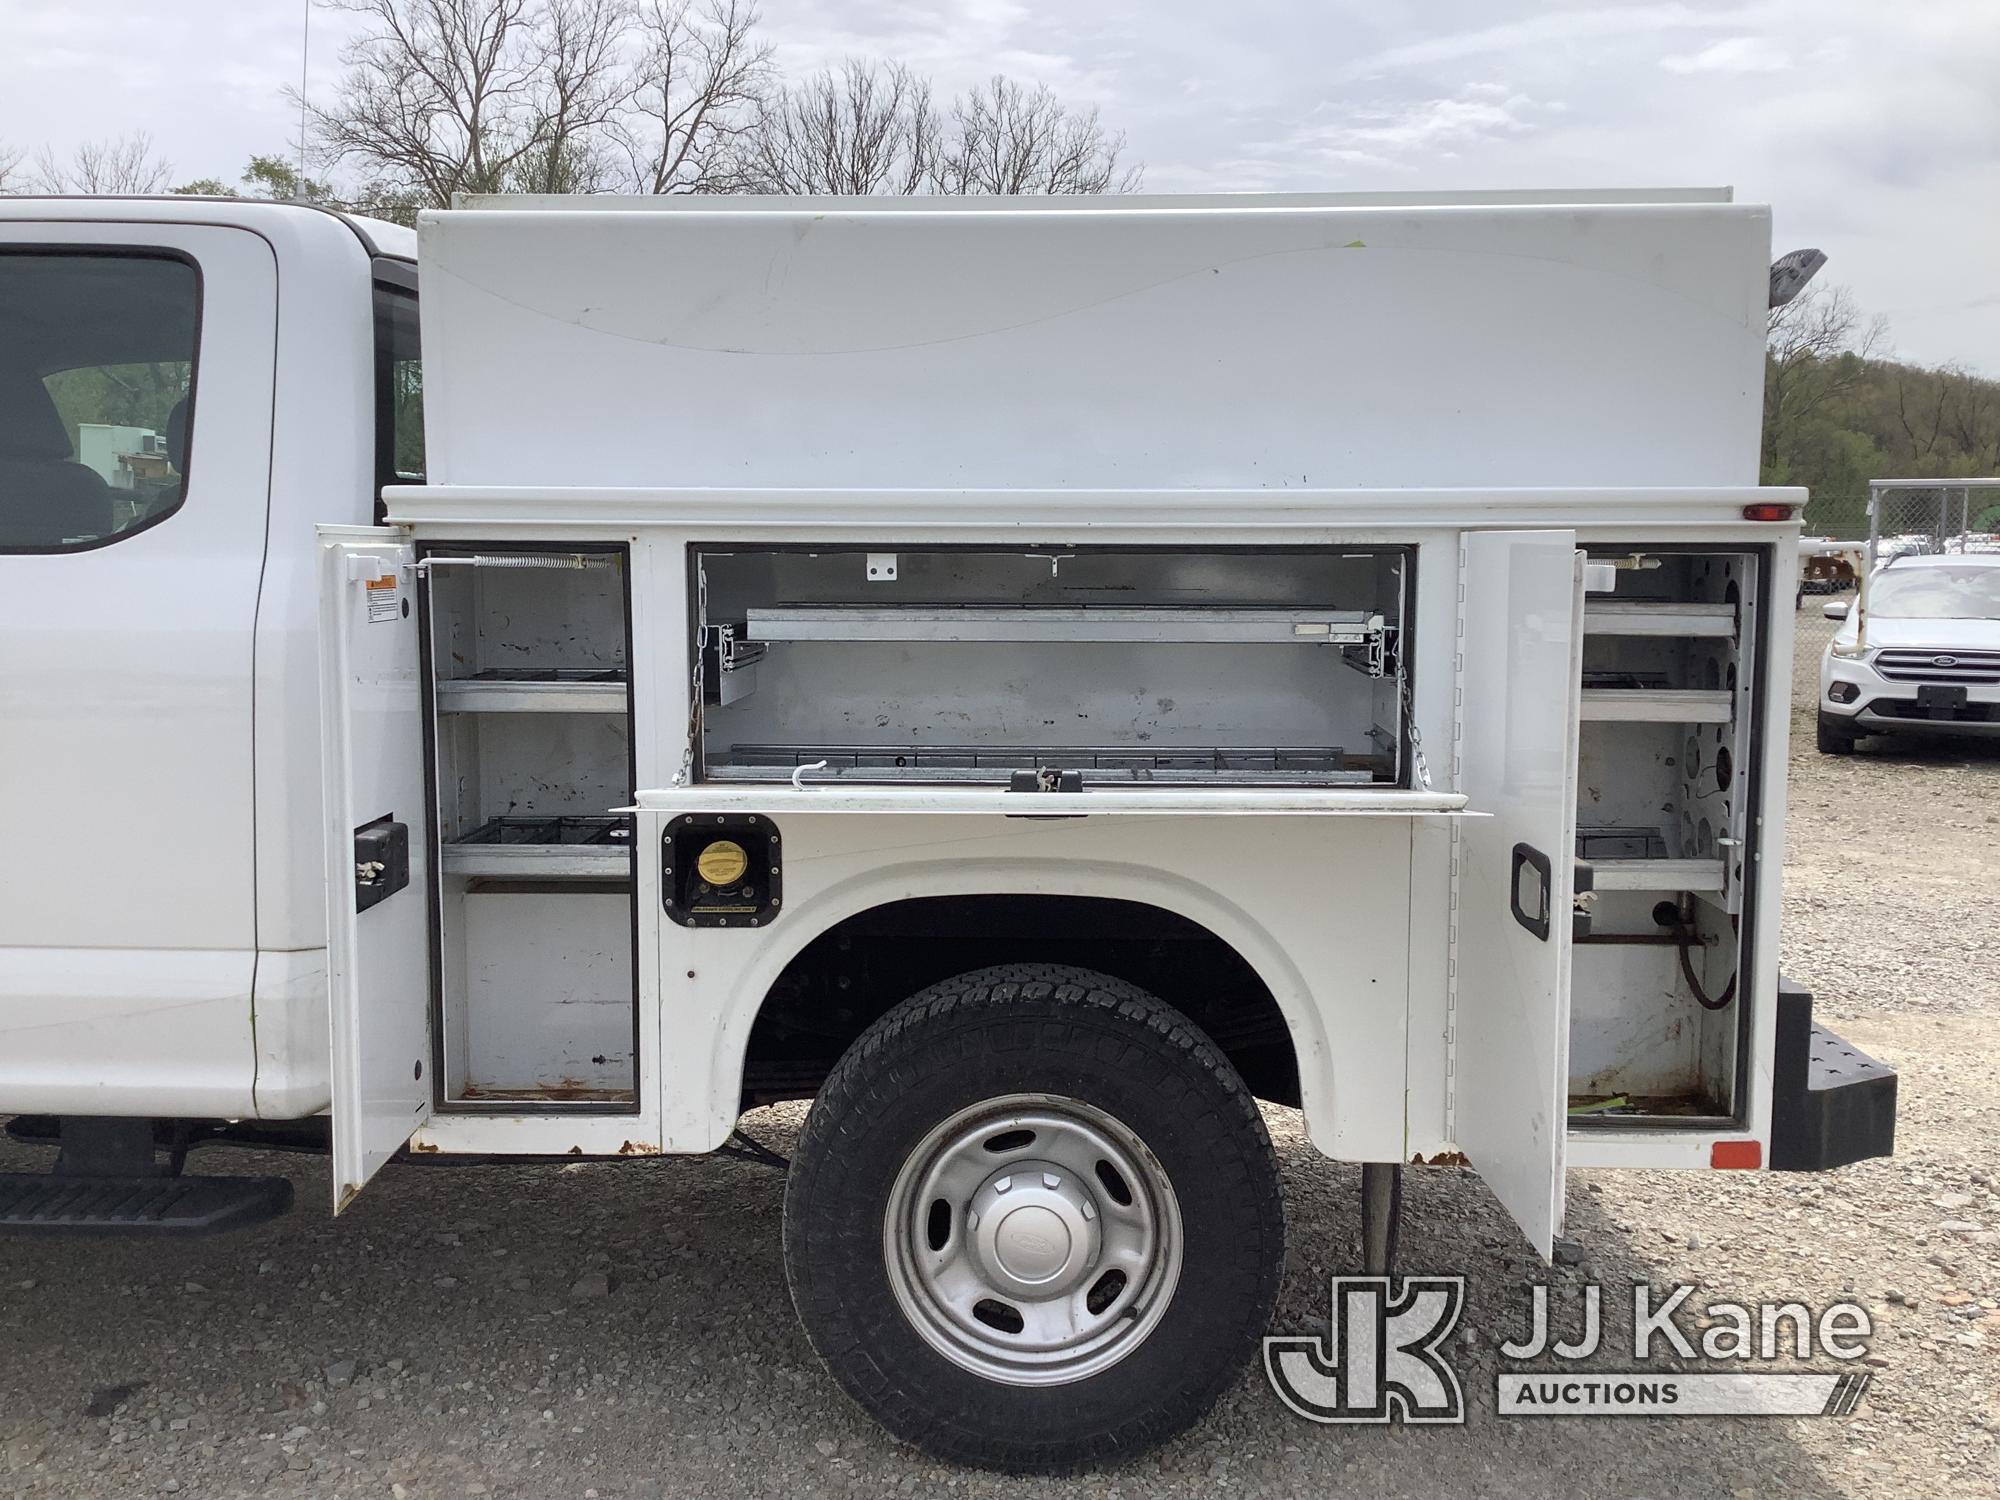 (Smock, PA) 2018 Ford F250 4x4 Extended-Cab Enclosed Service Truck Runs & Moves, Rust & Body Damage